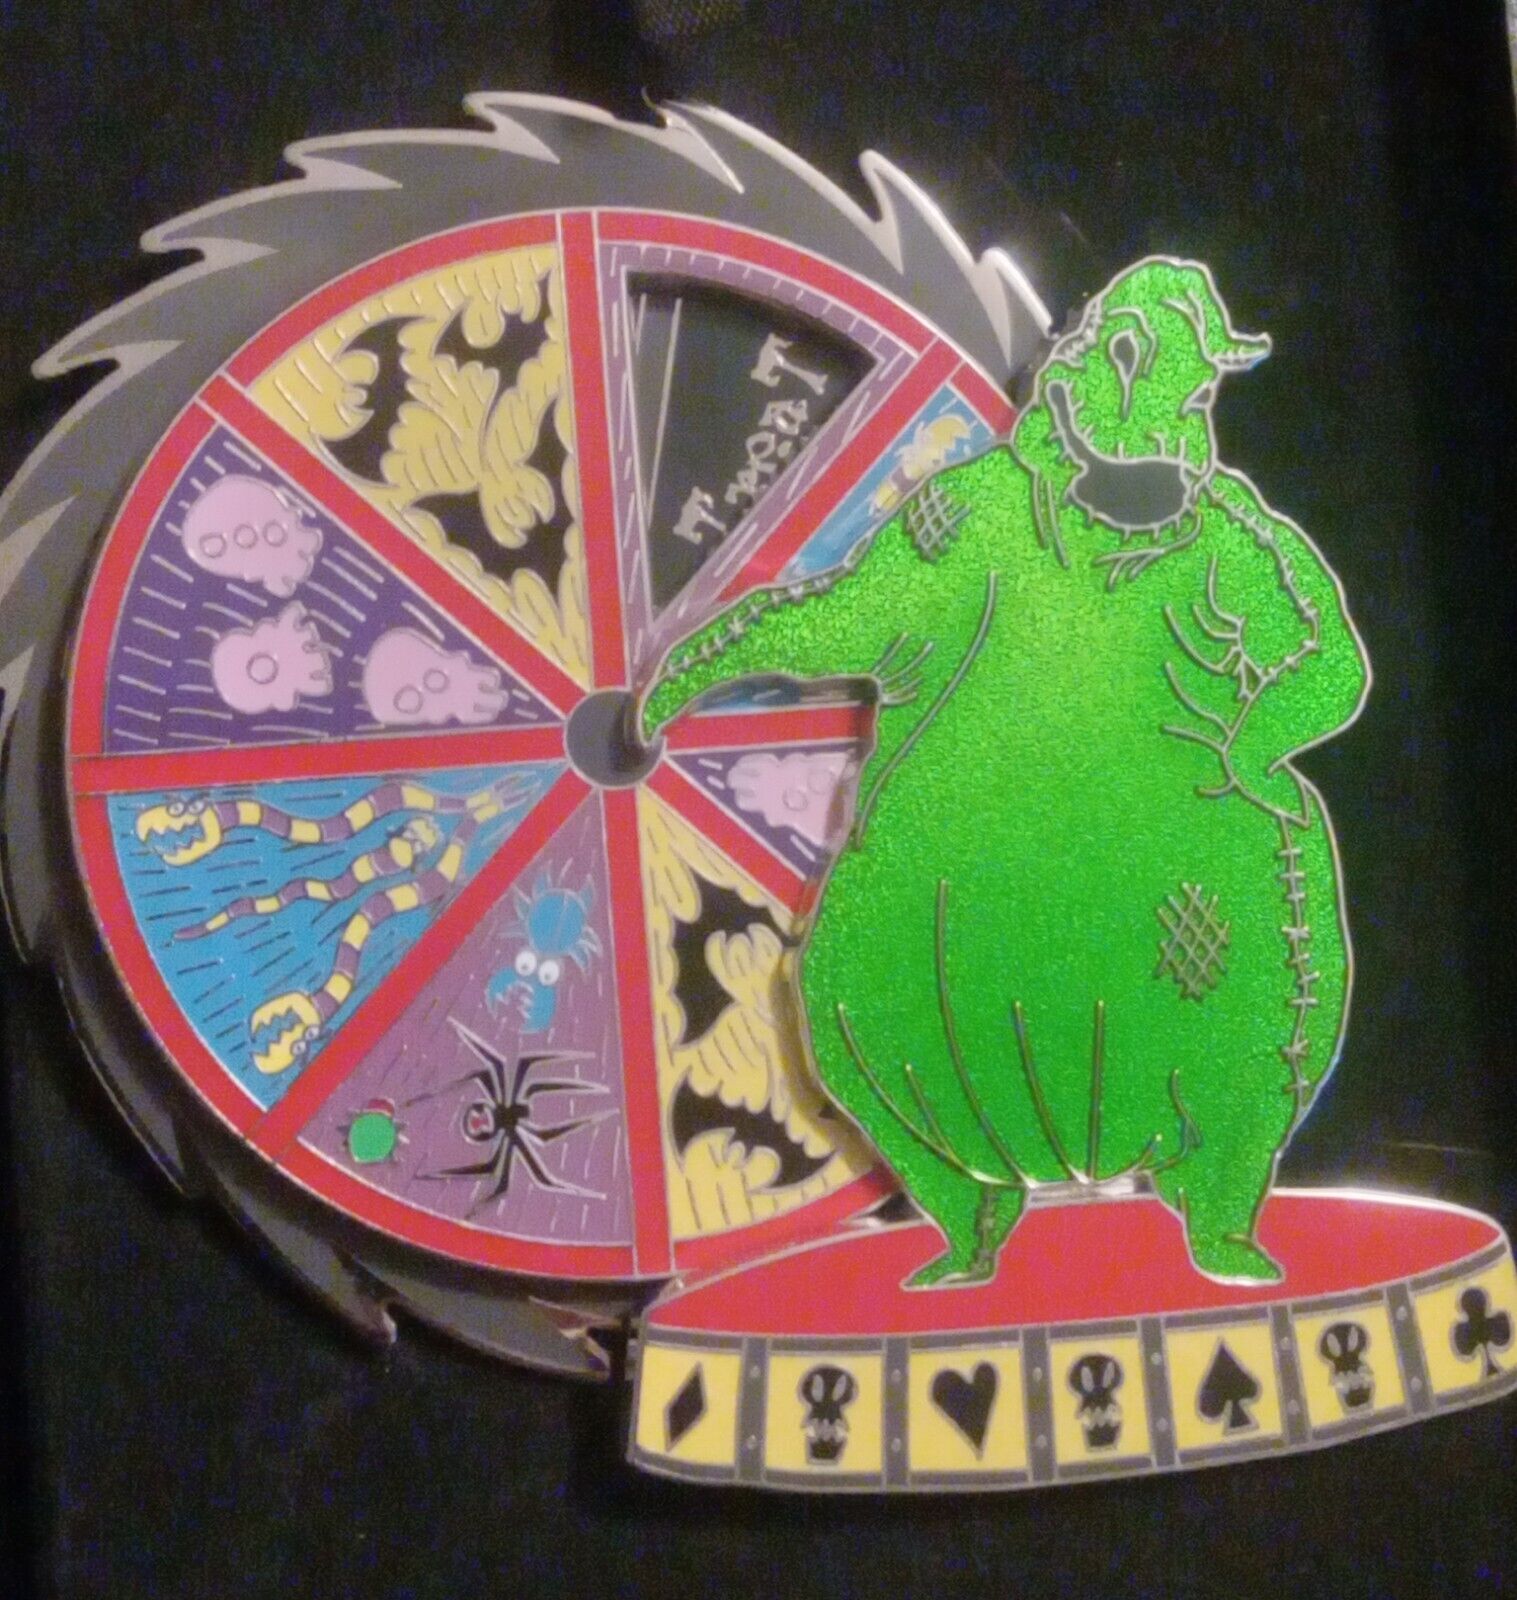 DLR Disney NBC Oogie Boogie Trick, Treat or Trade 2006 Spinner Jumbo LE 500 Pin